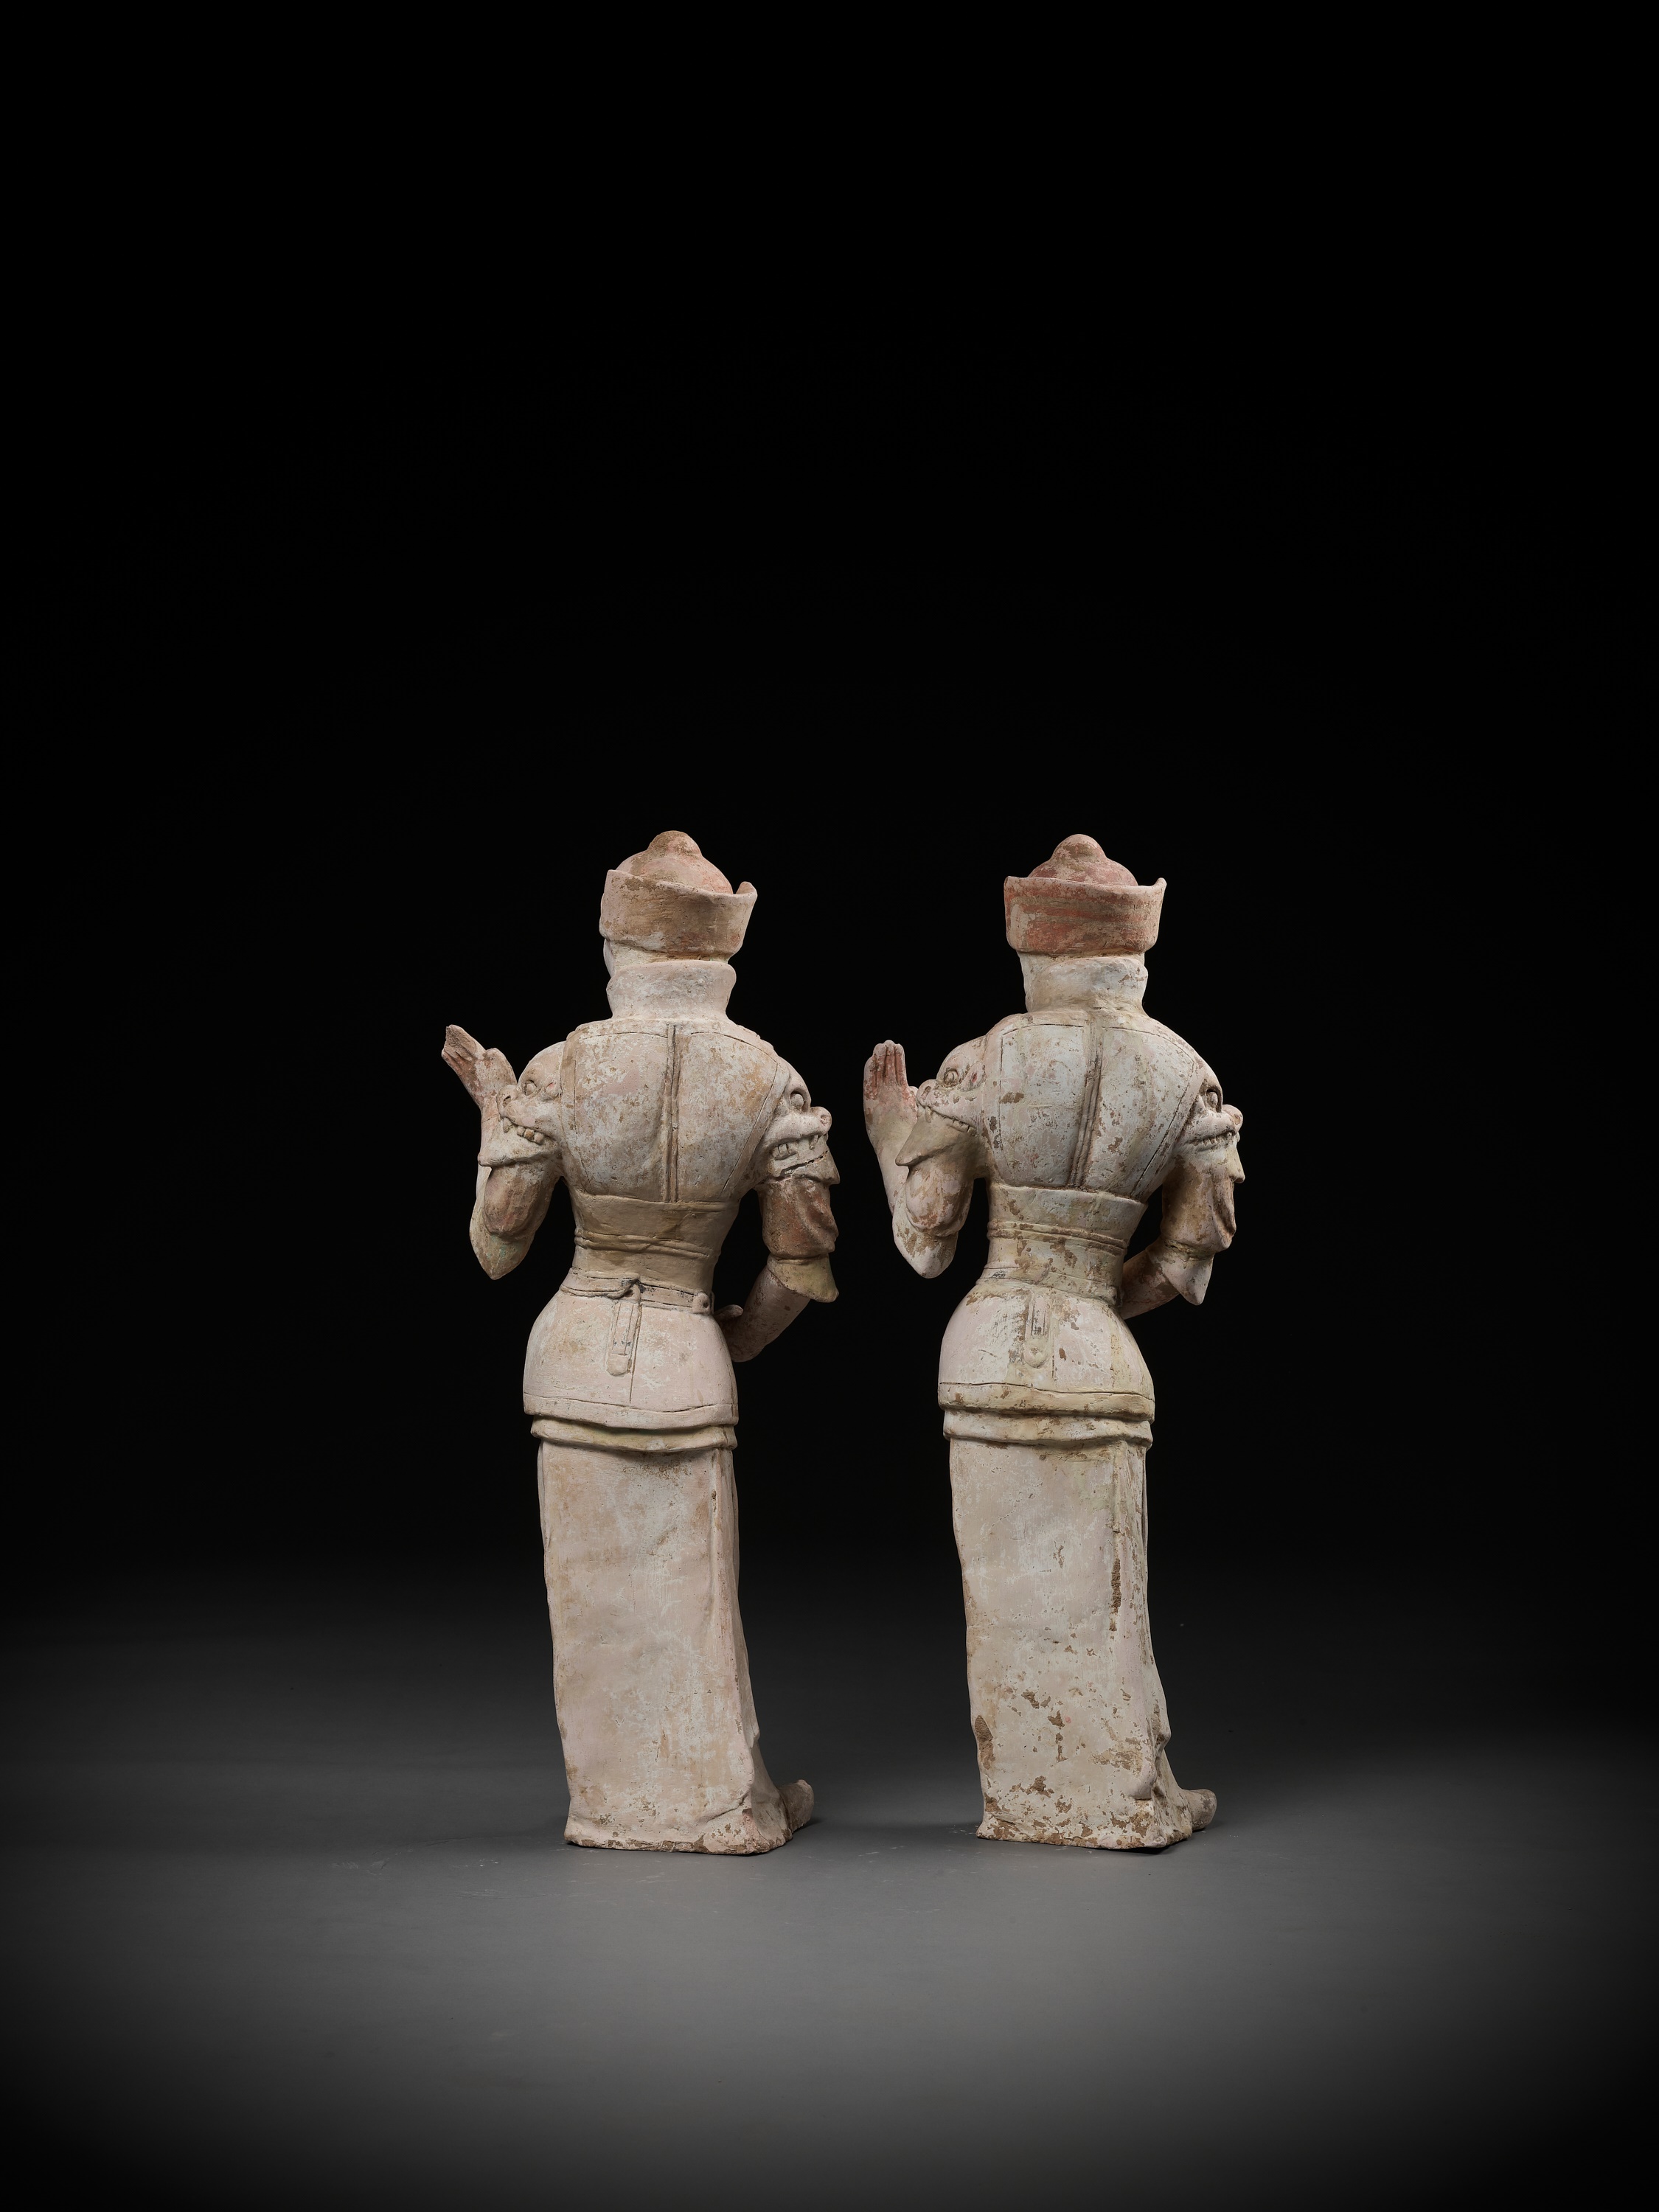 A PAIR OF LARGE POTTERY GUARDIAN FIGURES, WUSHIYONG, TANG DYNASTY - Image 11 of 12